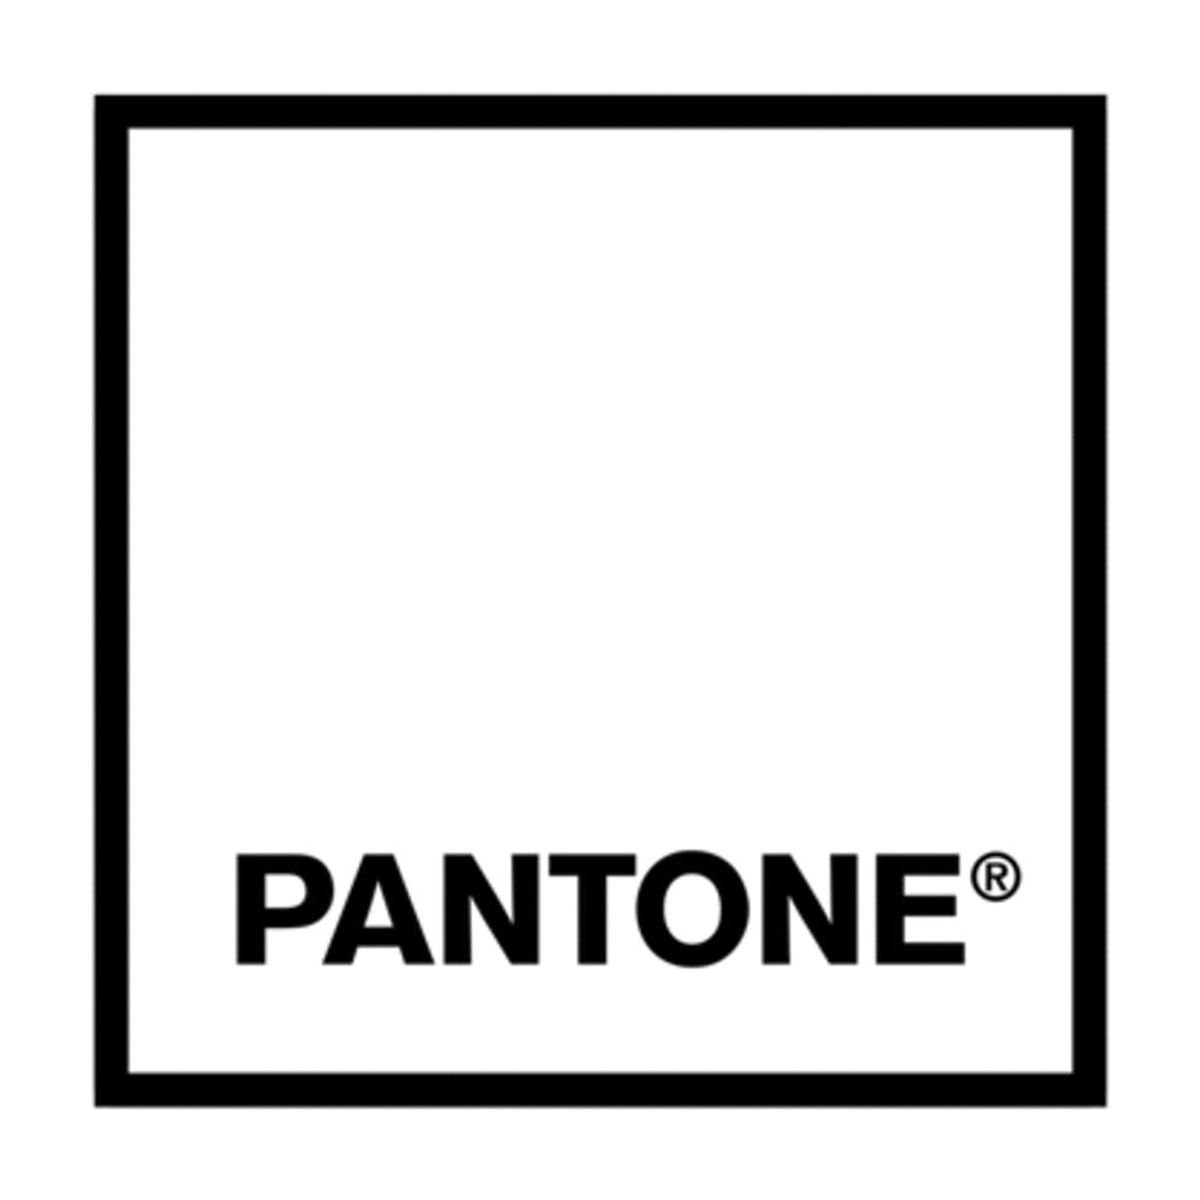 Pantone Reveals Their Top 12 Colors for Spring 2018